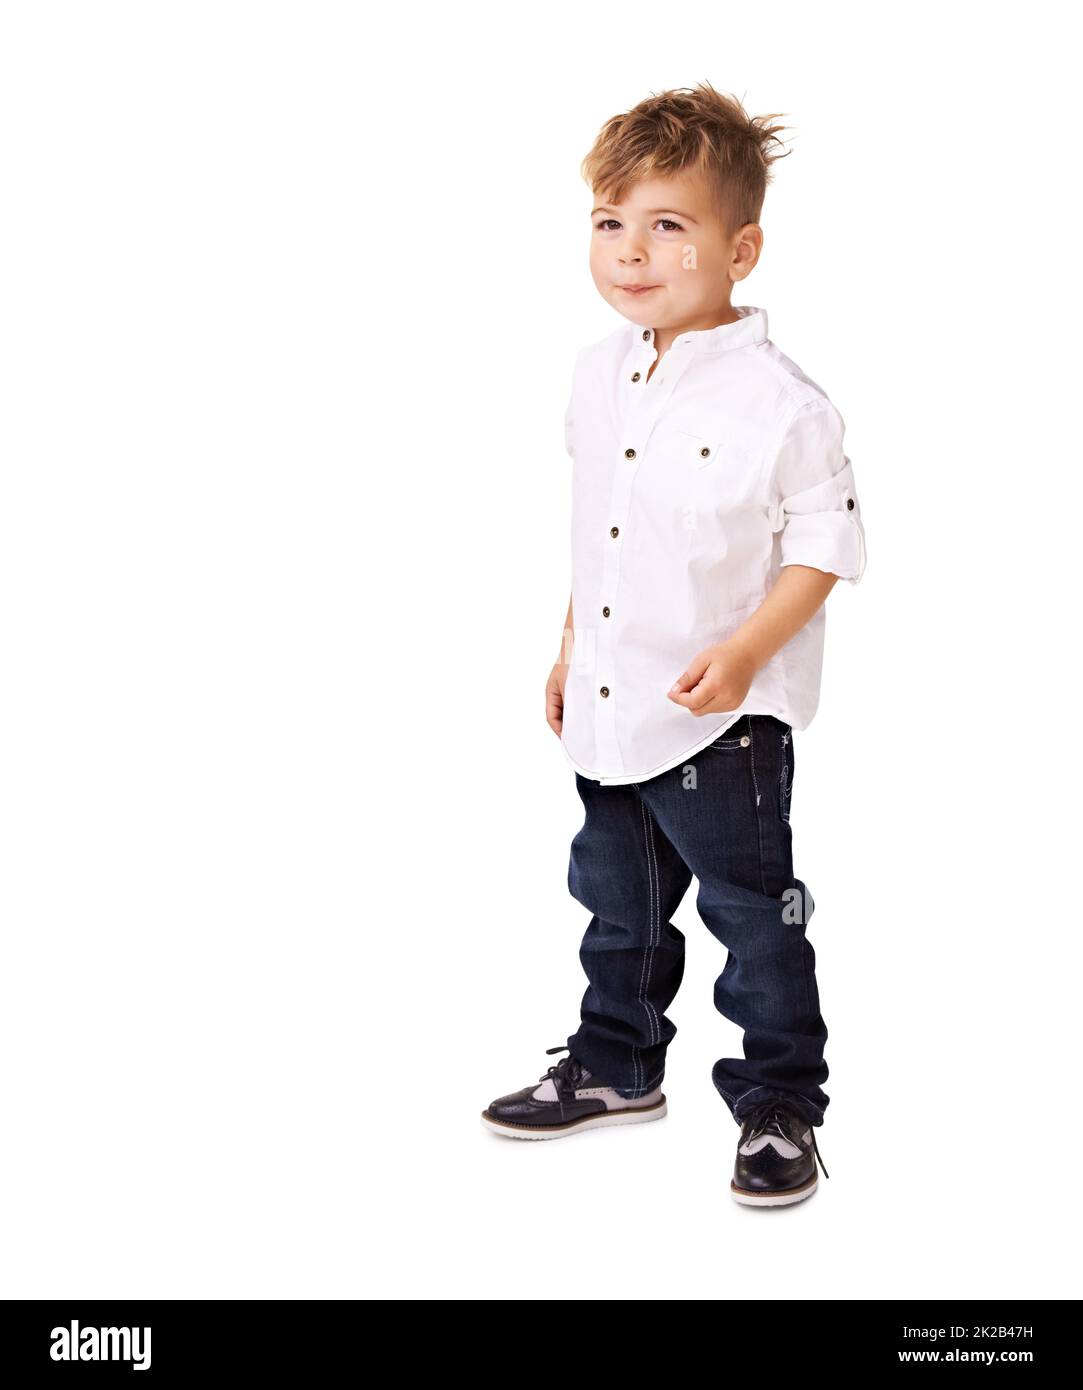 Trendy little man. A cute little boy posing on a white background. Stock Photo